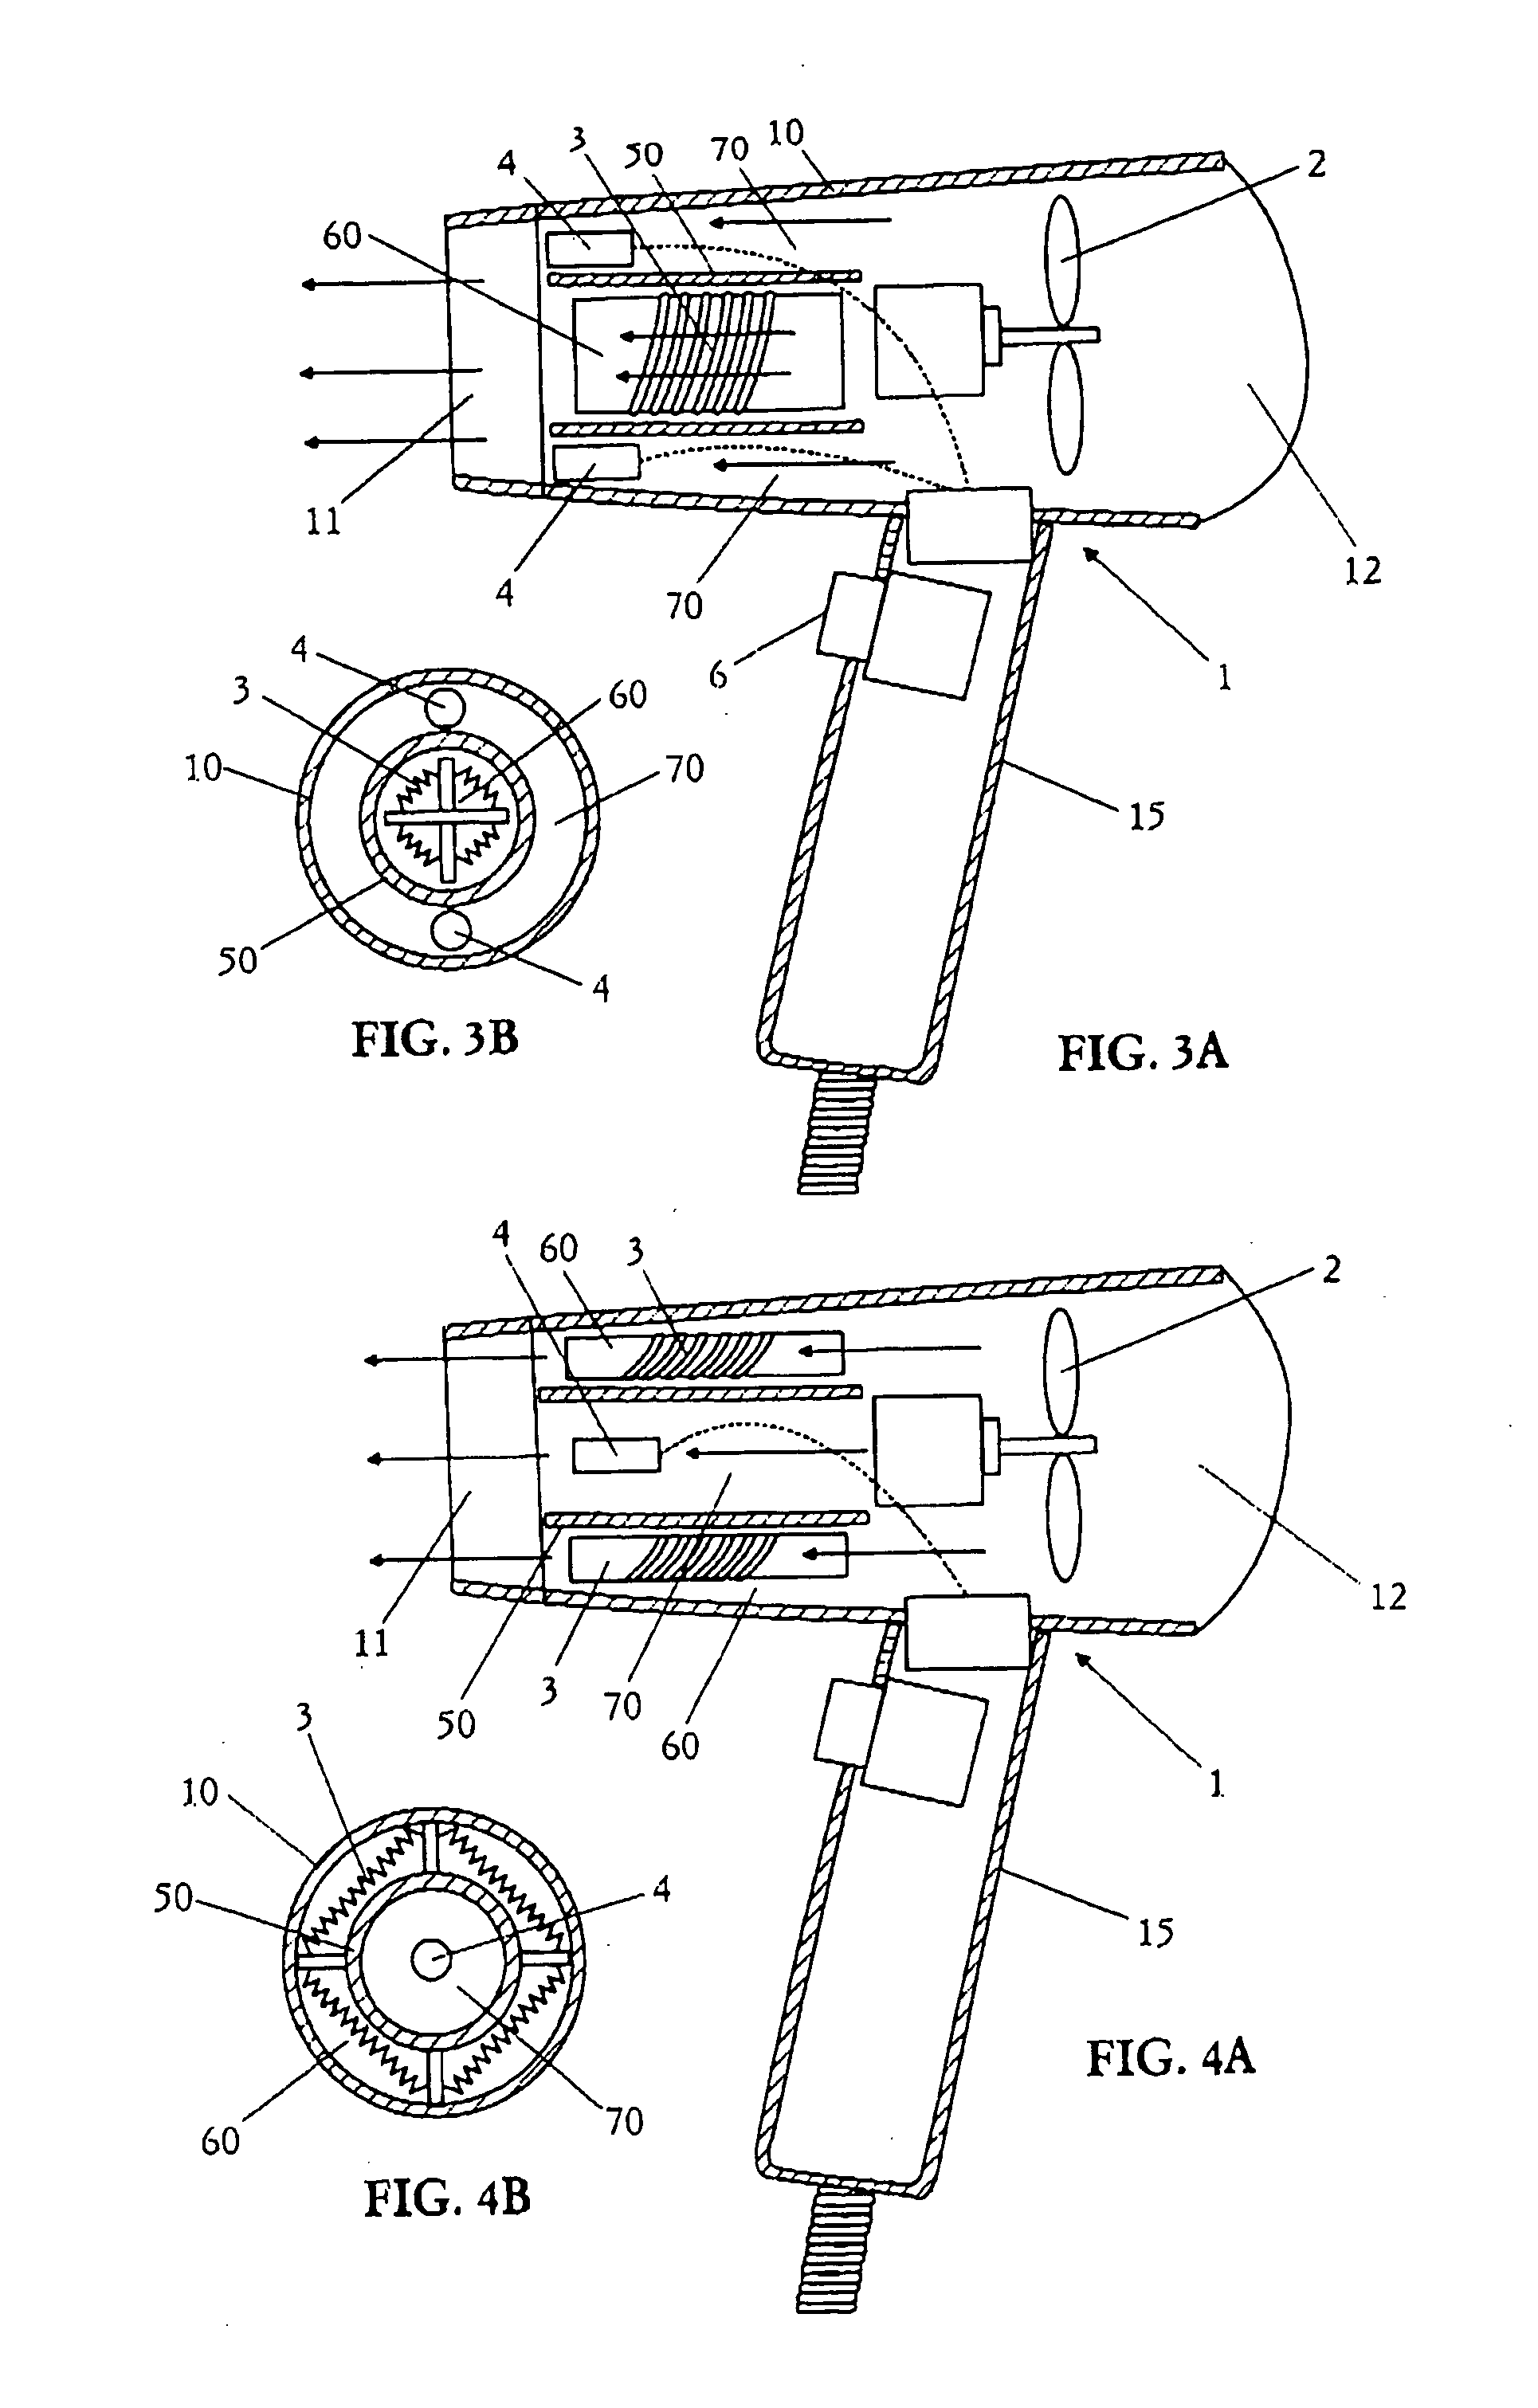 Hair dryer with minus ion generator